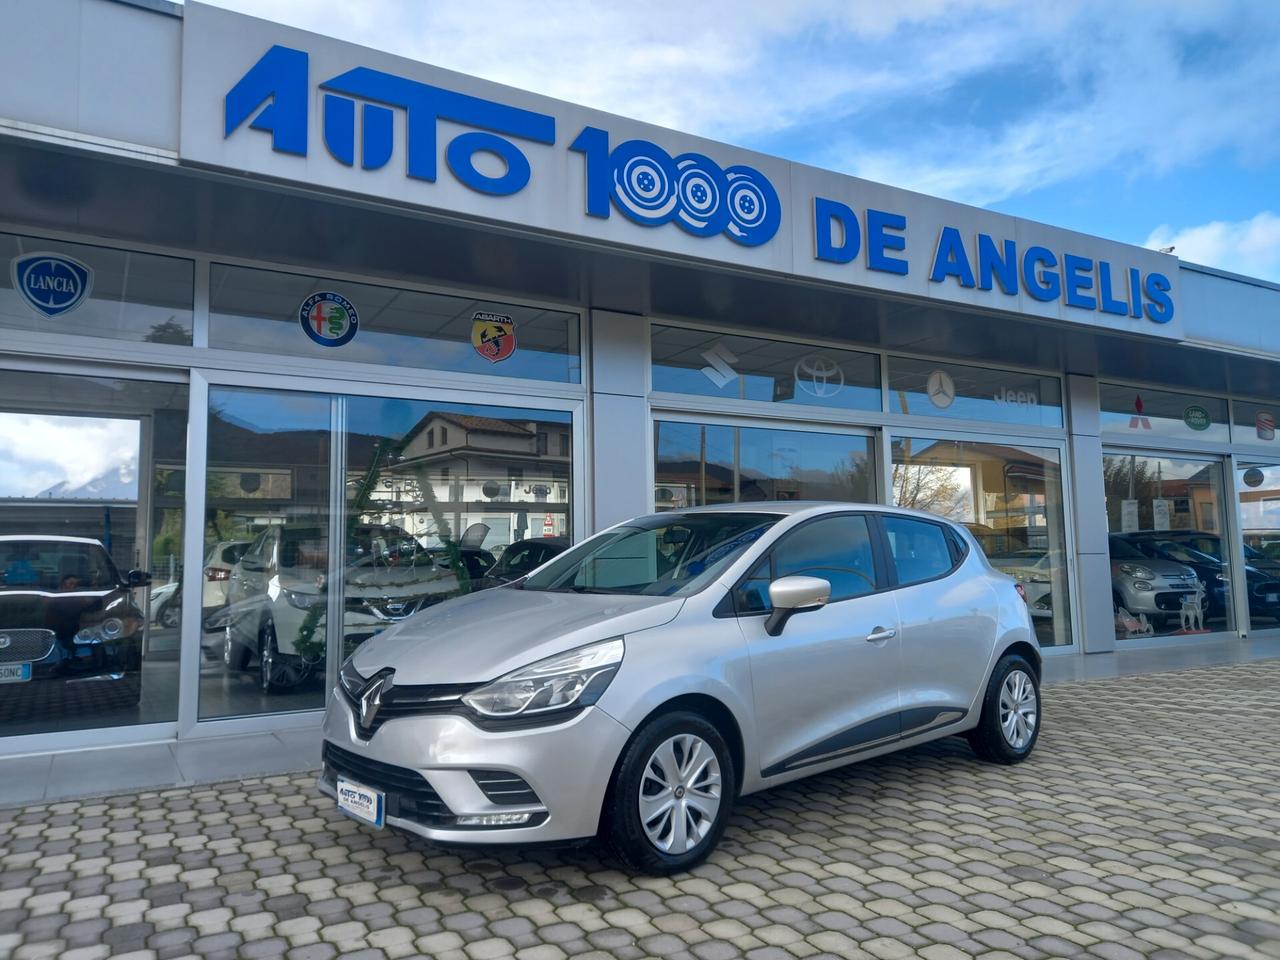 Renault Clio RESTYLING 1.5 dCi 75CV 5P *EURO 6B* FULL OPTIONALS